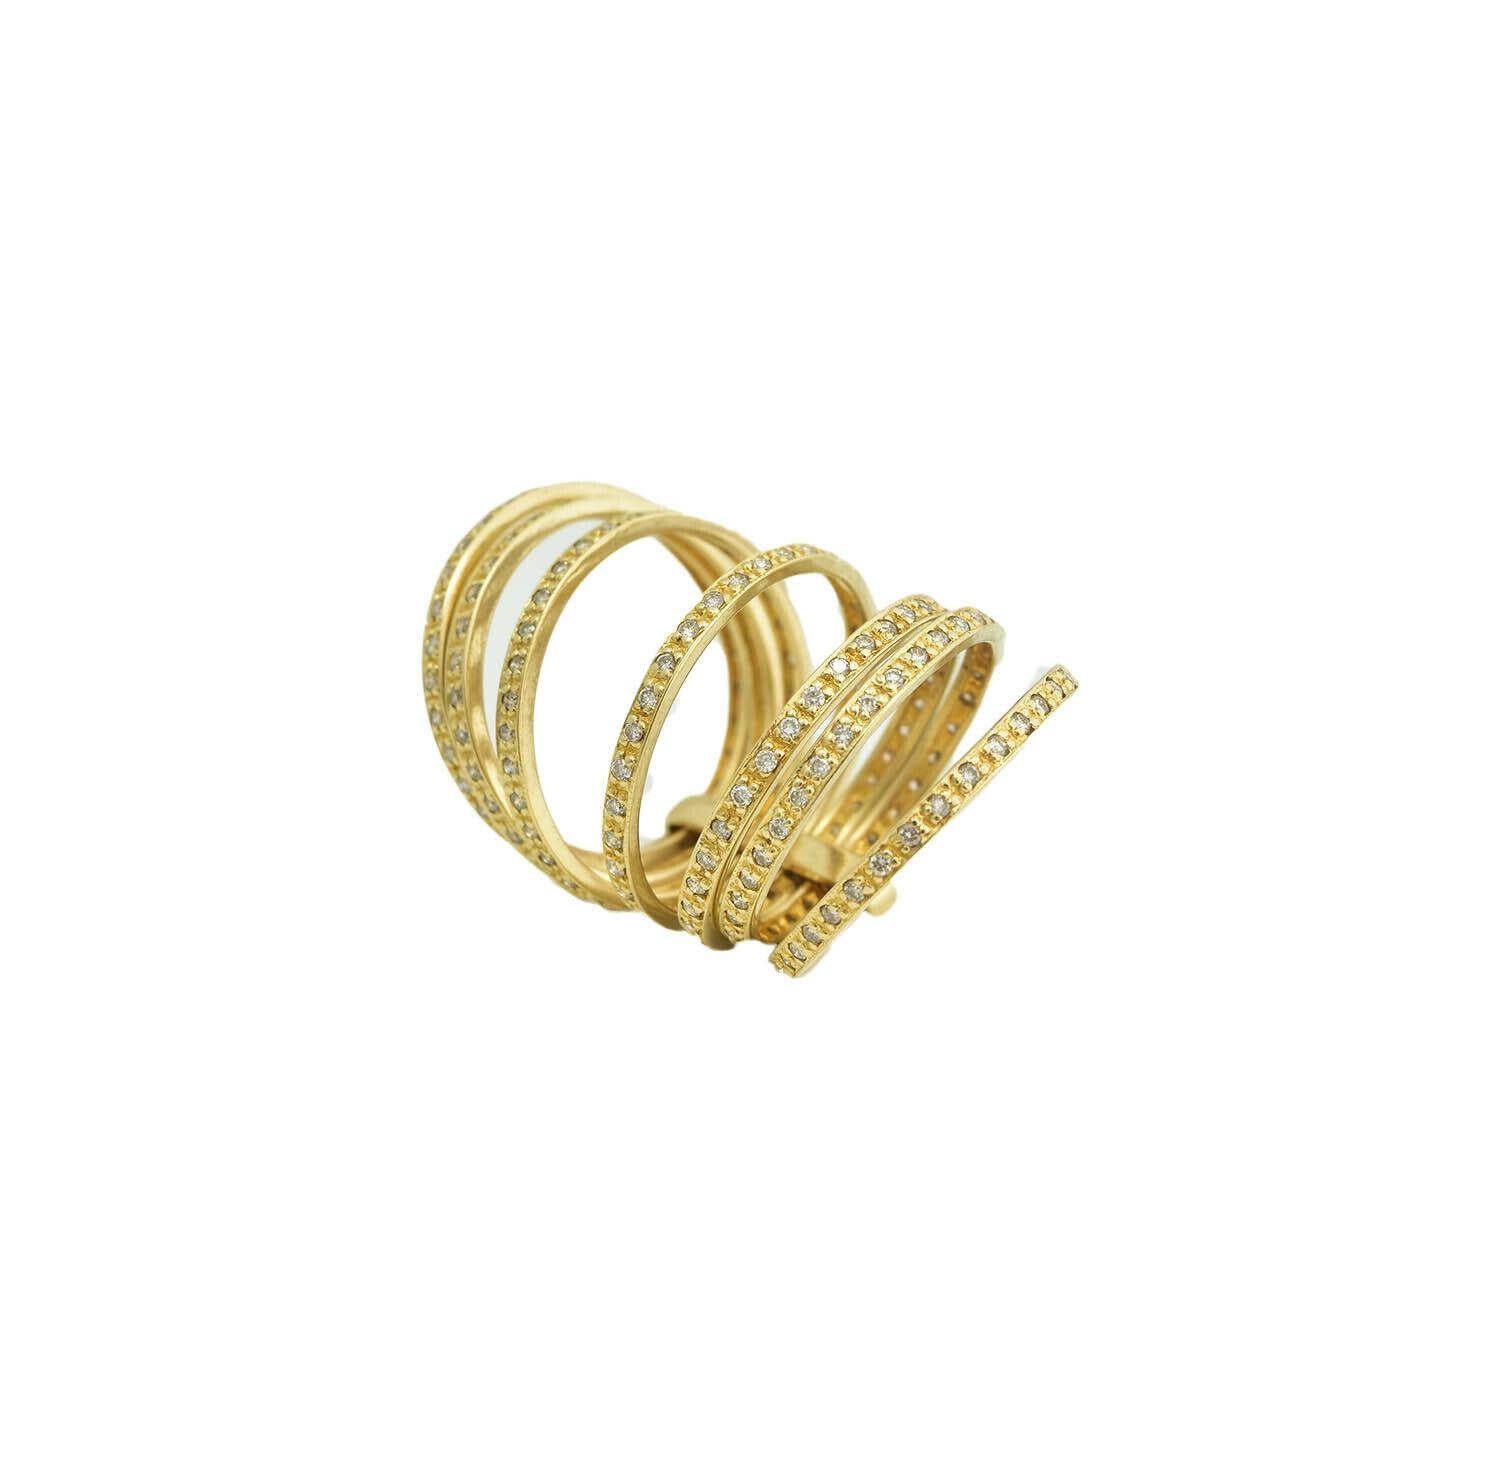 Style: Everyday Ring

Material: Yellow Gold

Metal Purity: 14K

Stone: Diamond

Ring Size: 6.75

Ring Top: 20.18 mm

Total Item Weight (g): 7.8g

Hallmarks: 585

Includes: 24 Month Brilliance Jewels Warranty 

Brilliance Jewels Packaging